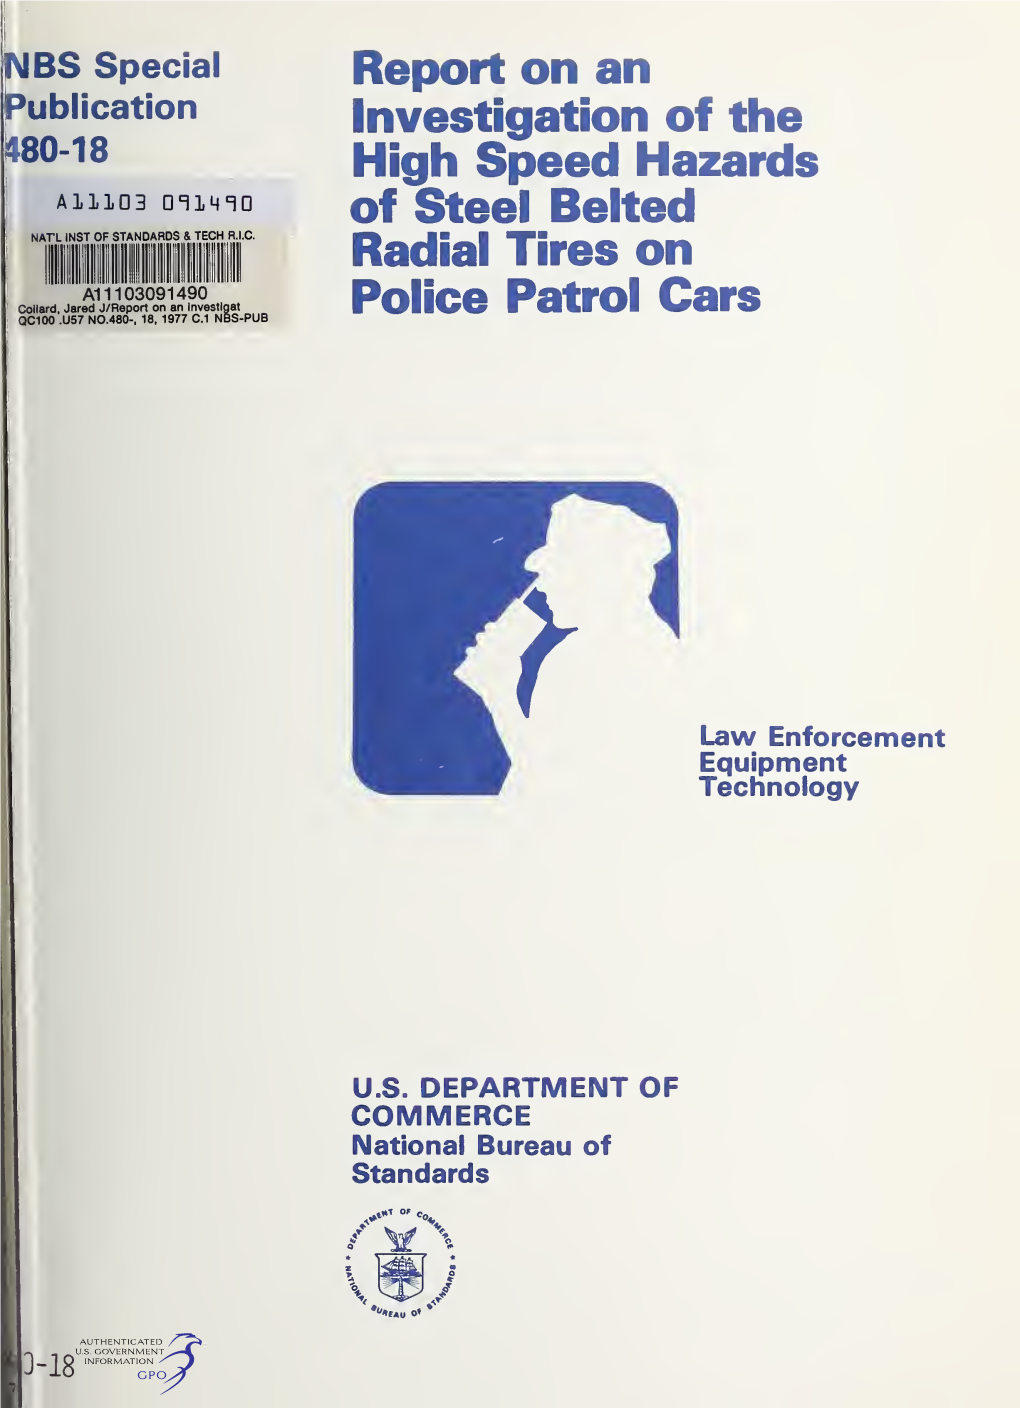 Report on an Investigation of the High Speed Hazards of Steel Belted Radial Tires on Police Patrol Cars